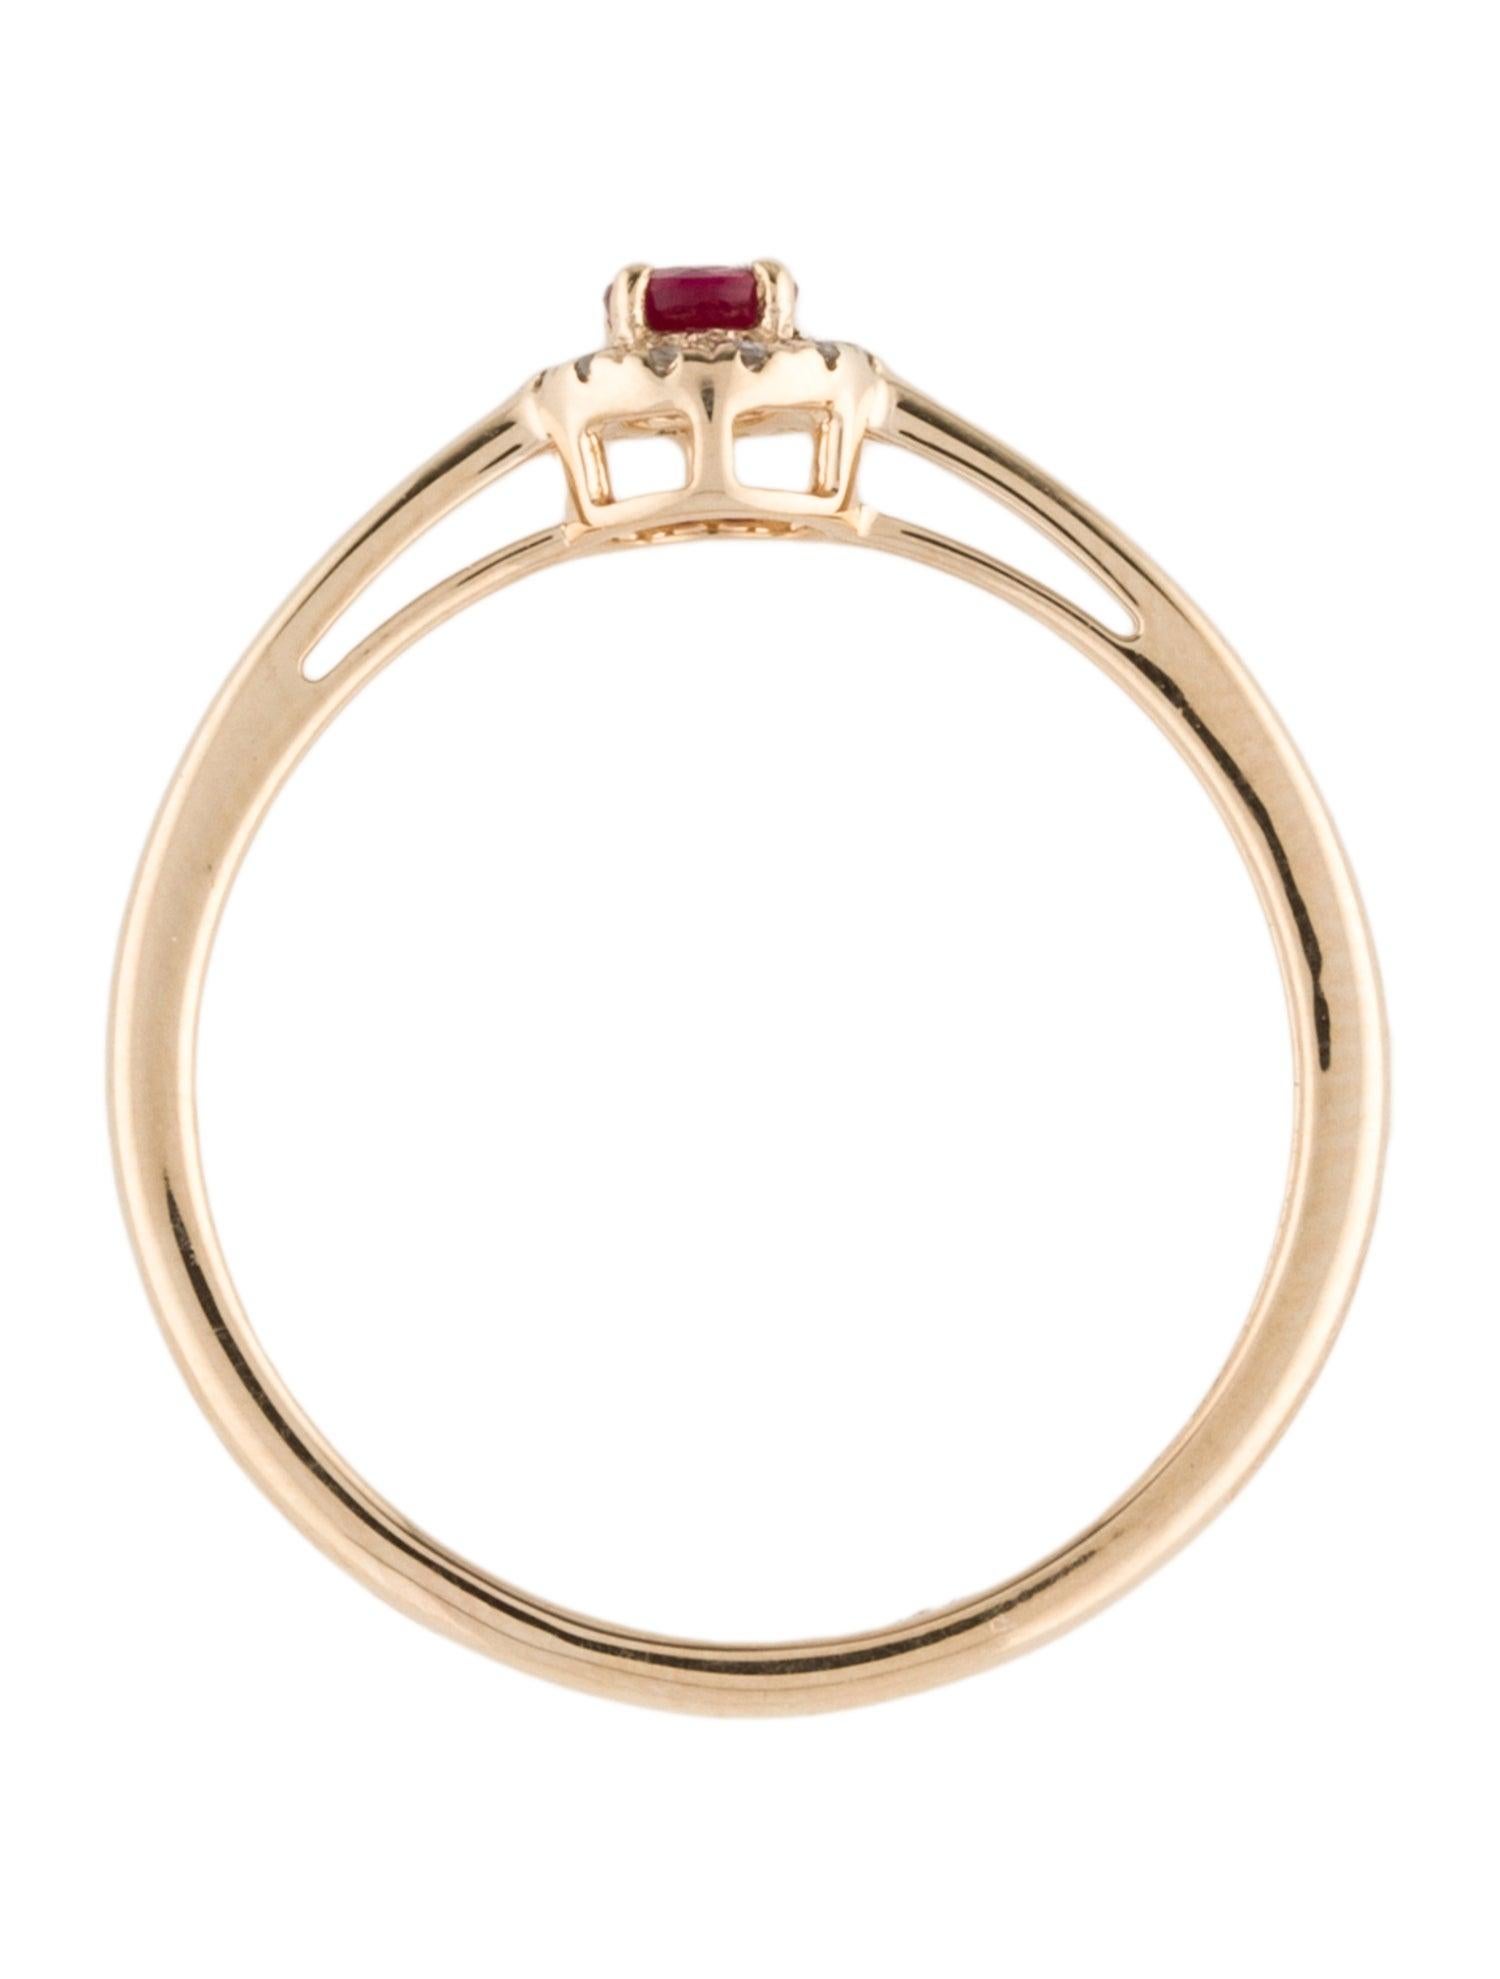 Women's 14K Yellow Gold Thin Cocktail Ring with 0.14ct Ruby and 0.06ct Diamond Accents For Sale